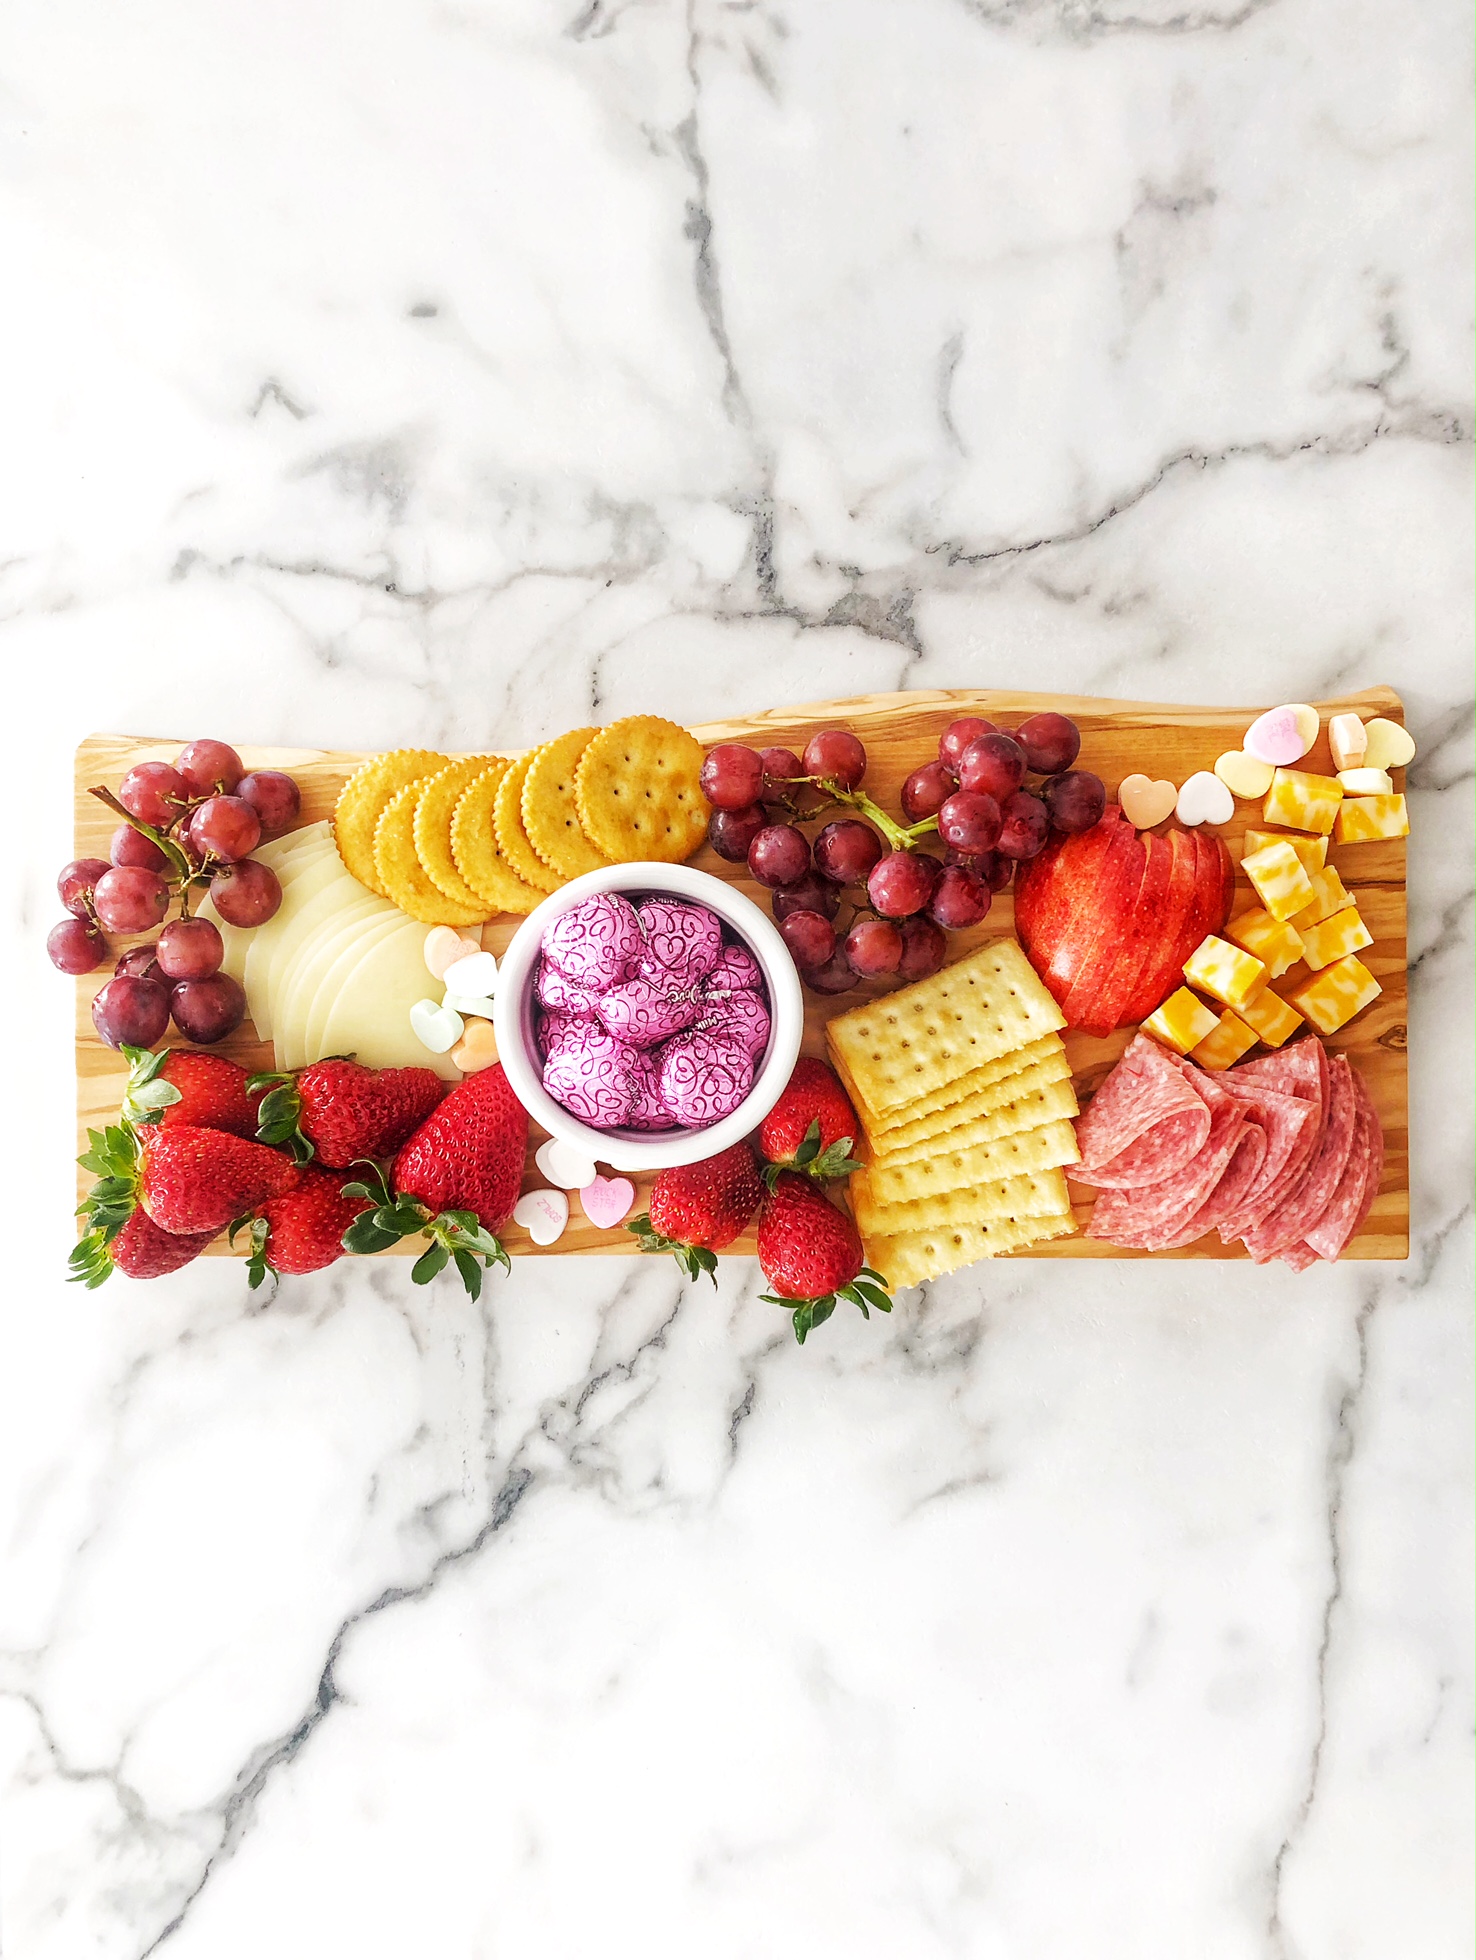 Let’s Make A Special Valentine’s Day Charcuterie Board!